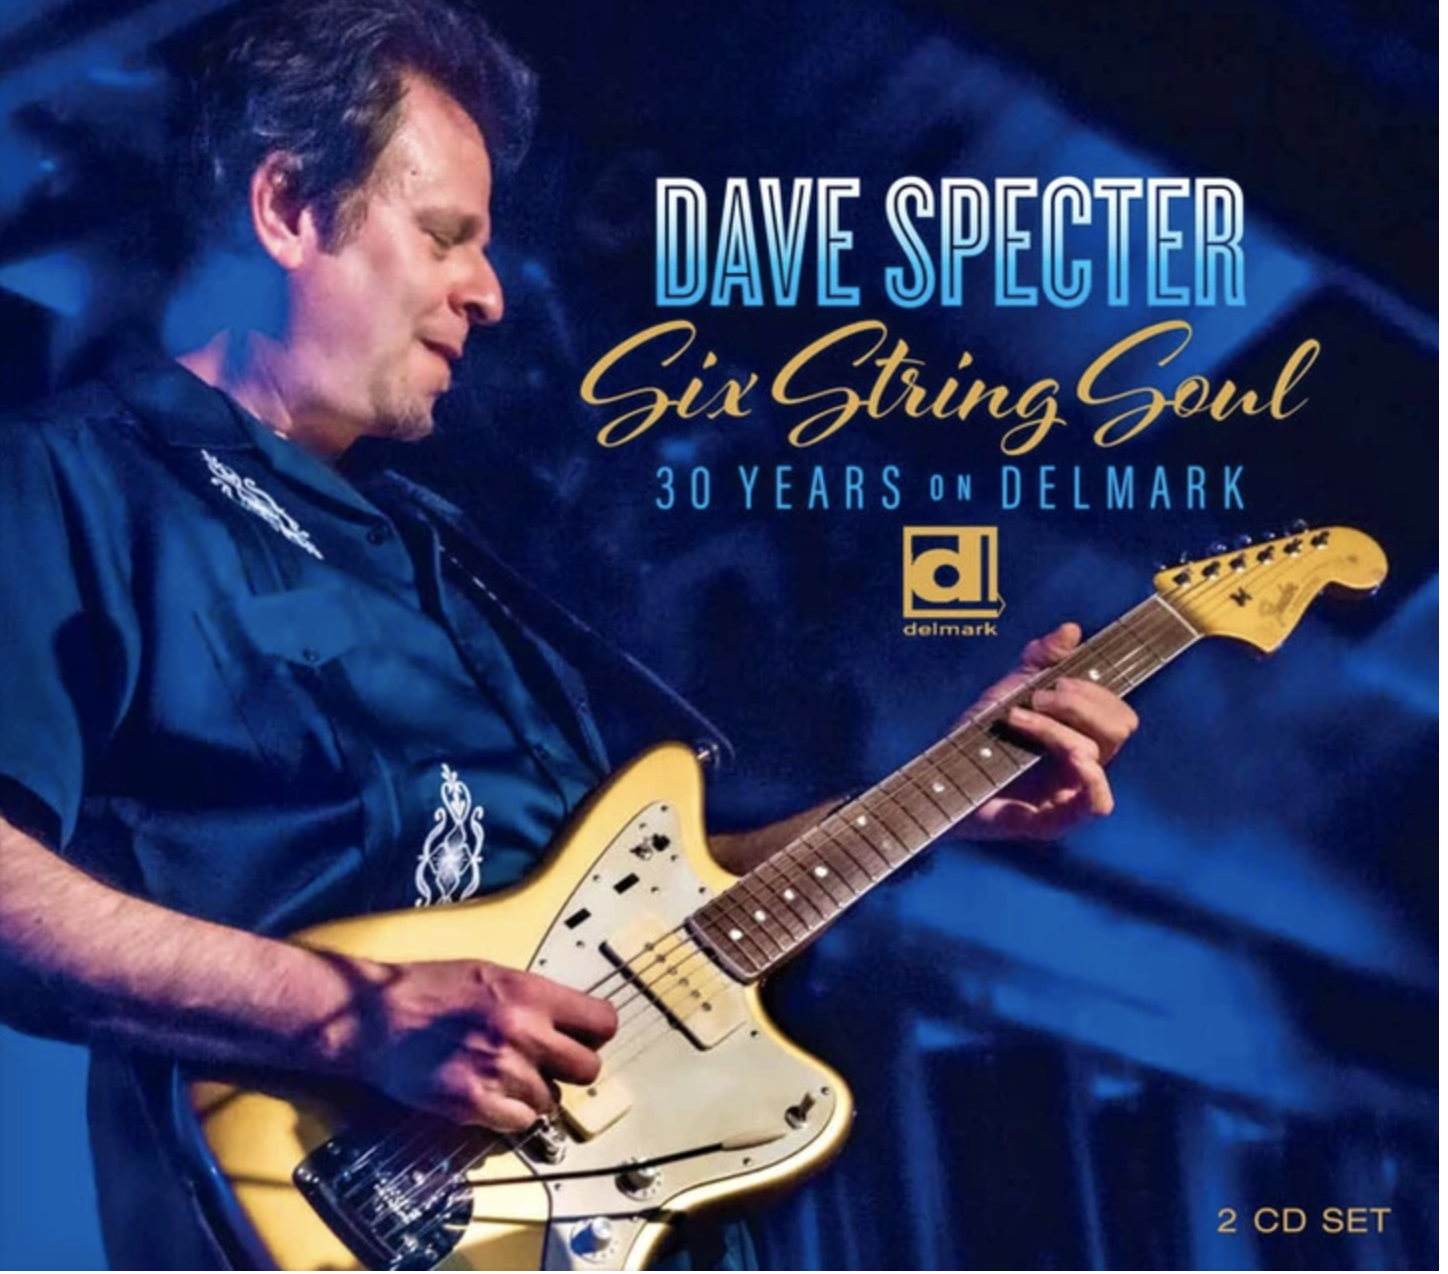 DAVE SPECTERS “SIX STRING SOUL” GETS ENTHUSIASTIC REVIEWS ACROSS THE WORLD 